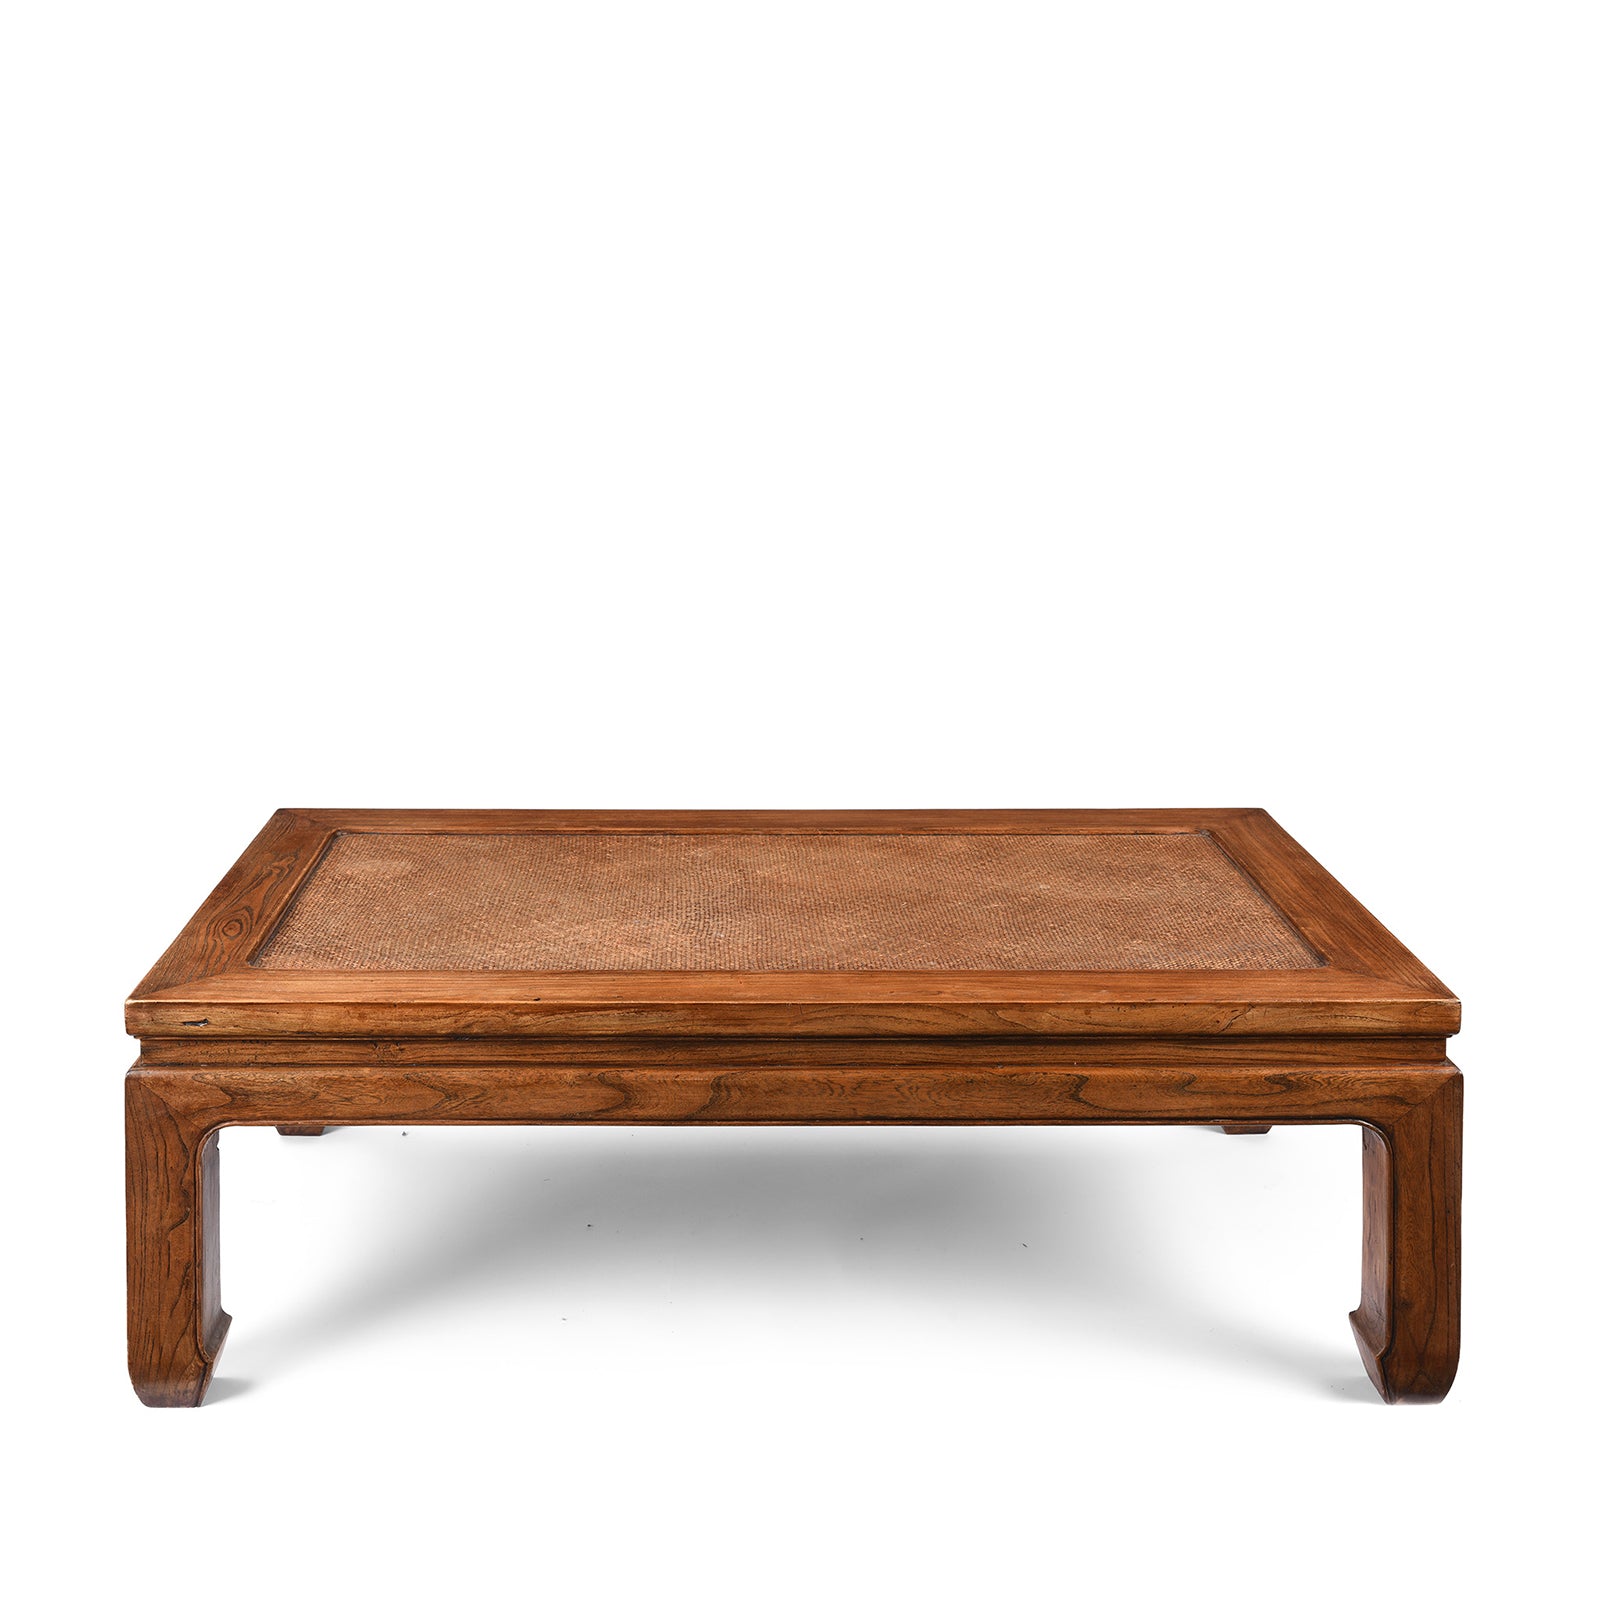 Reproduction Cane Top Coffee Table Made From Old Elm | Indigo Antiques